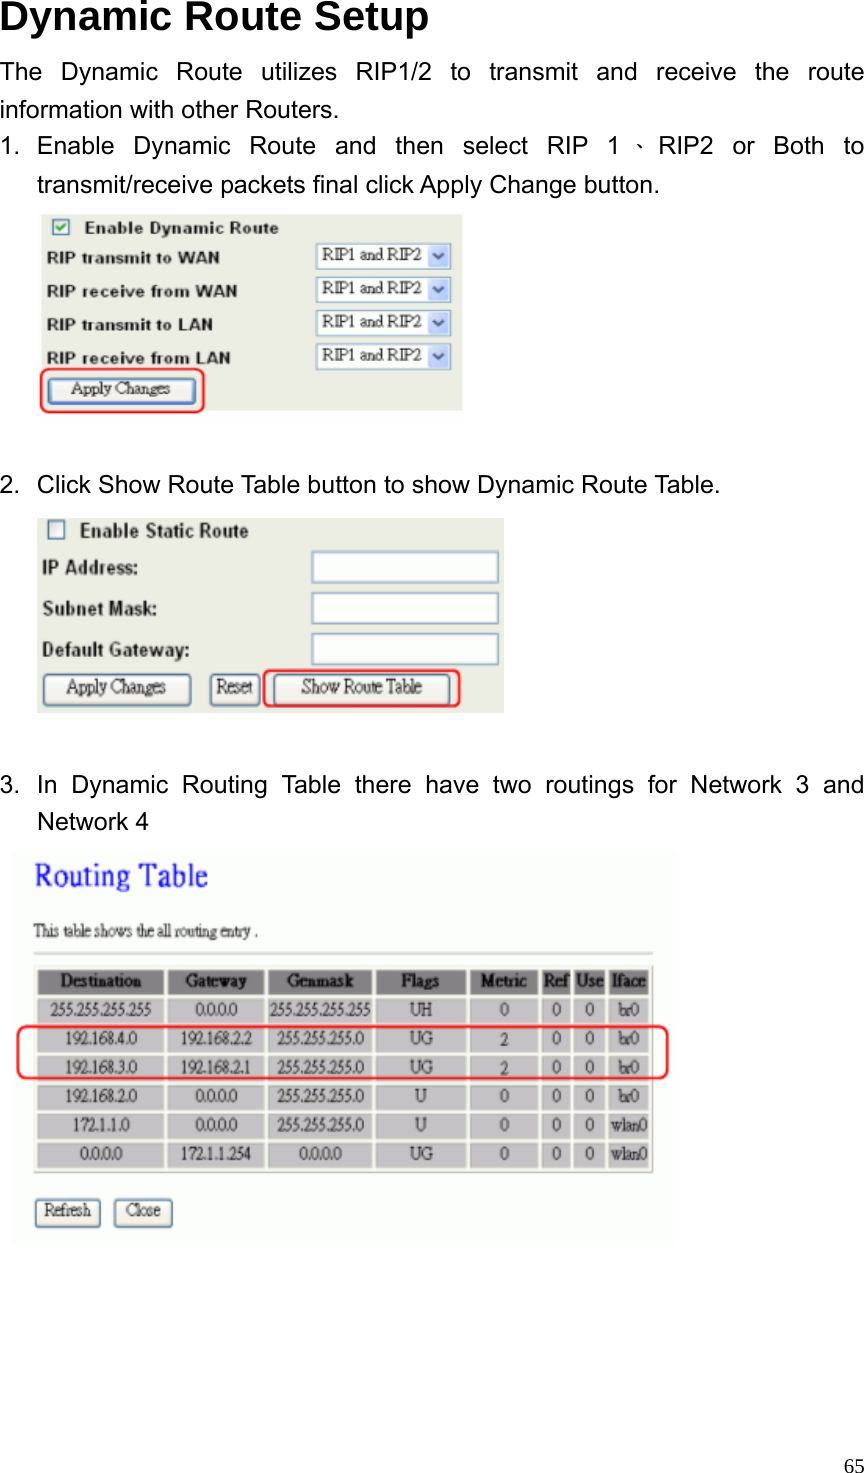  65Dynamic Route Setup The Dynamic Route utilizes RIP1/2 to transmit and receive the route information with other Routers. 1. Enable Dynamic Route and then select RIP 1 、RIP2 or Both to transmit/receive packets final click Apply Change button.   2.  Click Show Route Table button to show Dynamic Route Table.   3.  In Dynamic Routing Table there have two routings for Network 3 and Network 4     